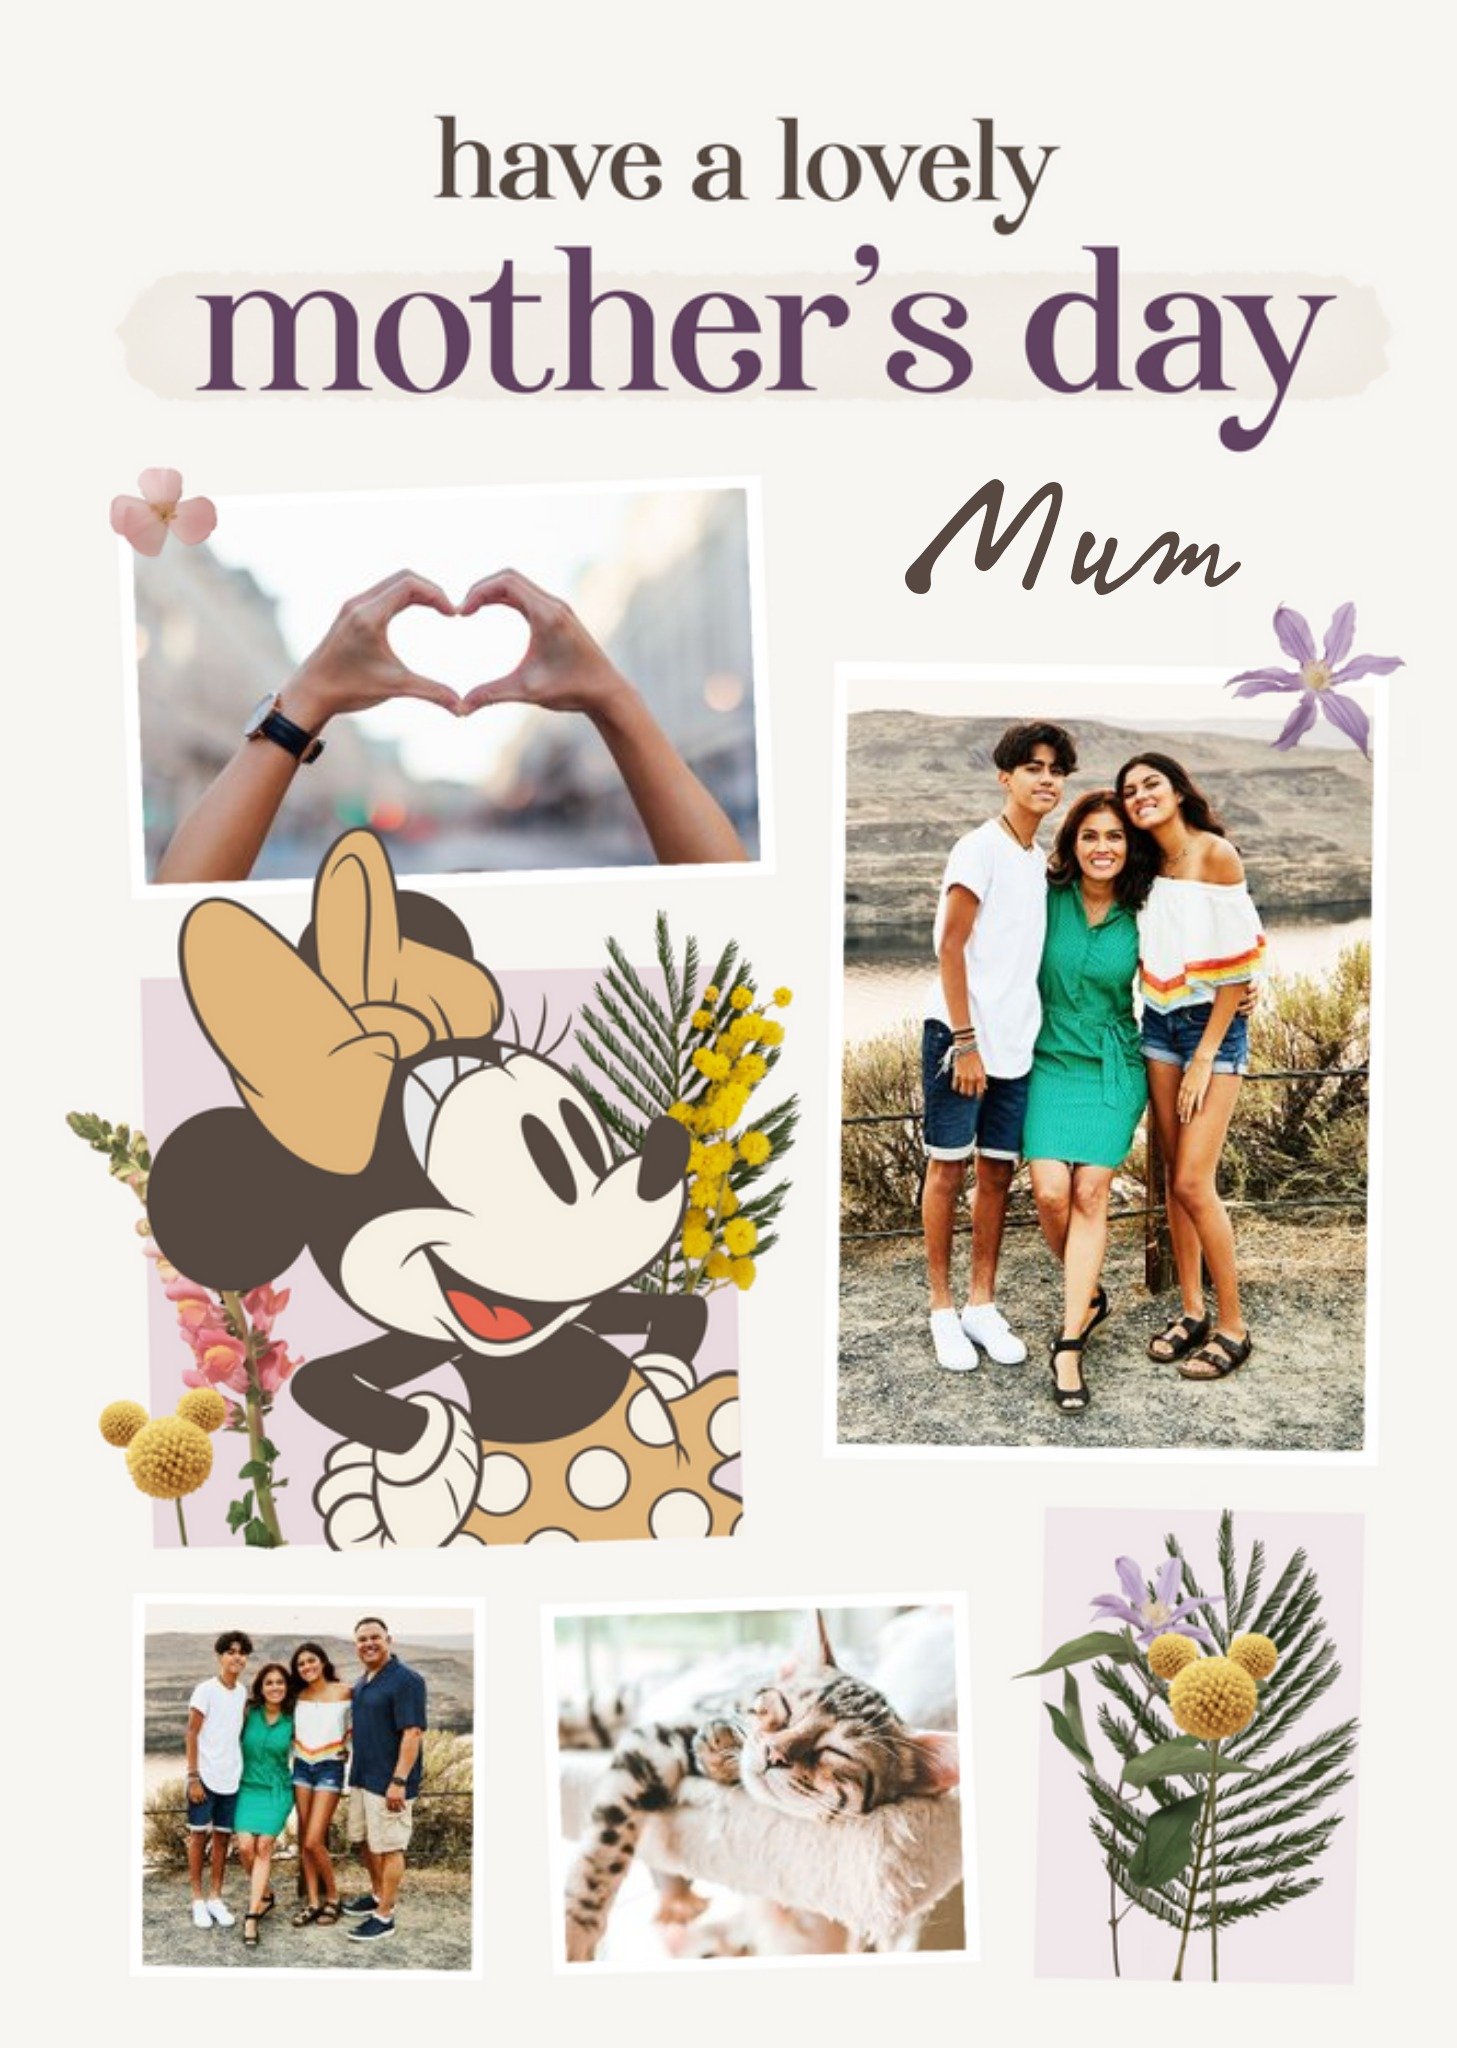 Disney Minnie Mouse Have A Lovely Mothers Day Mum Photo Upload Card, Large